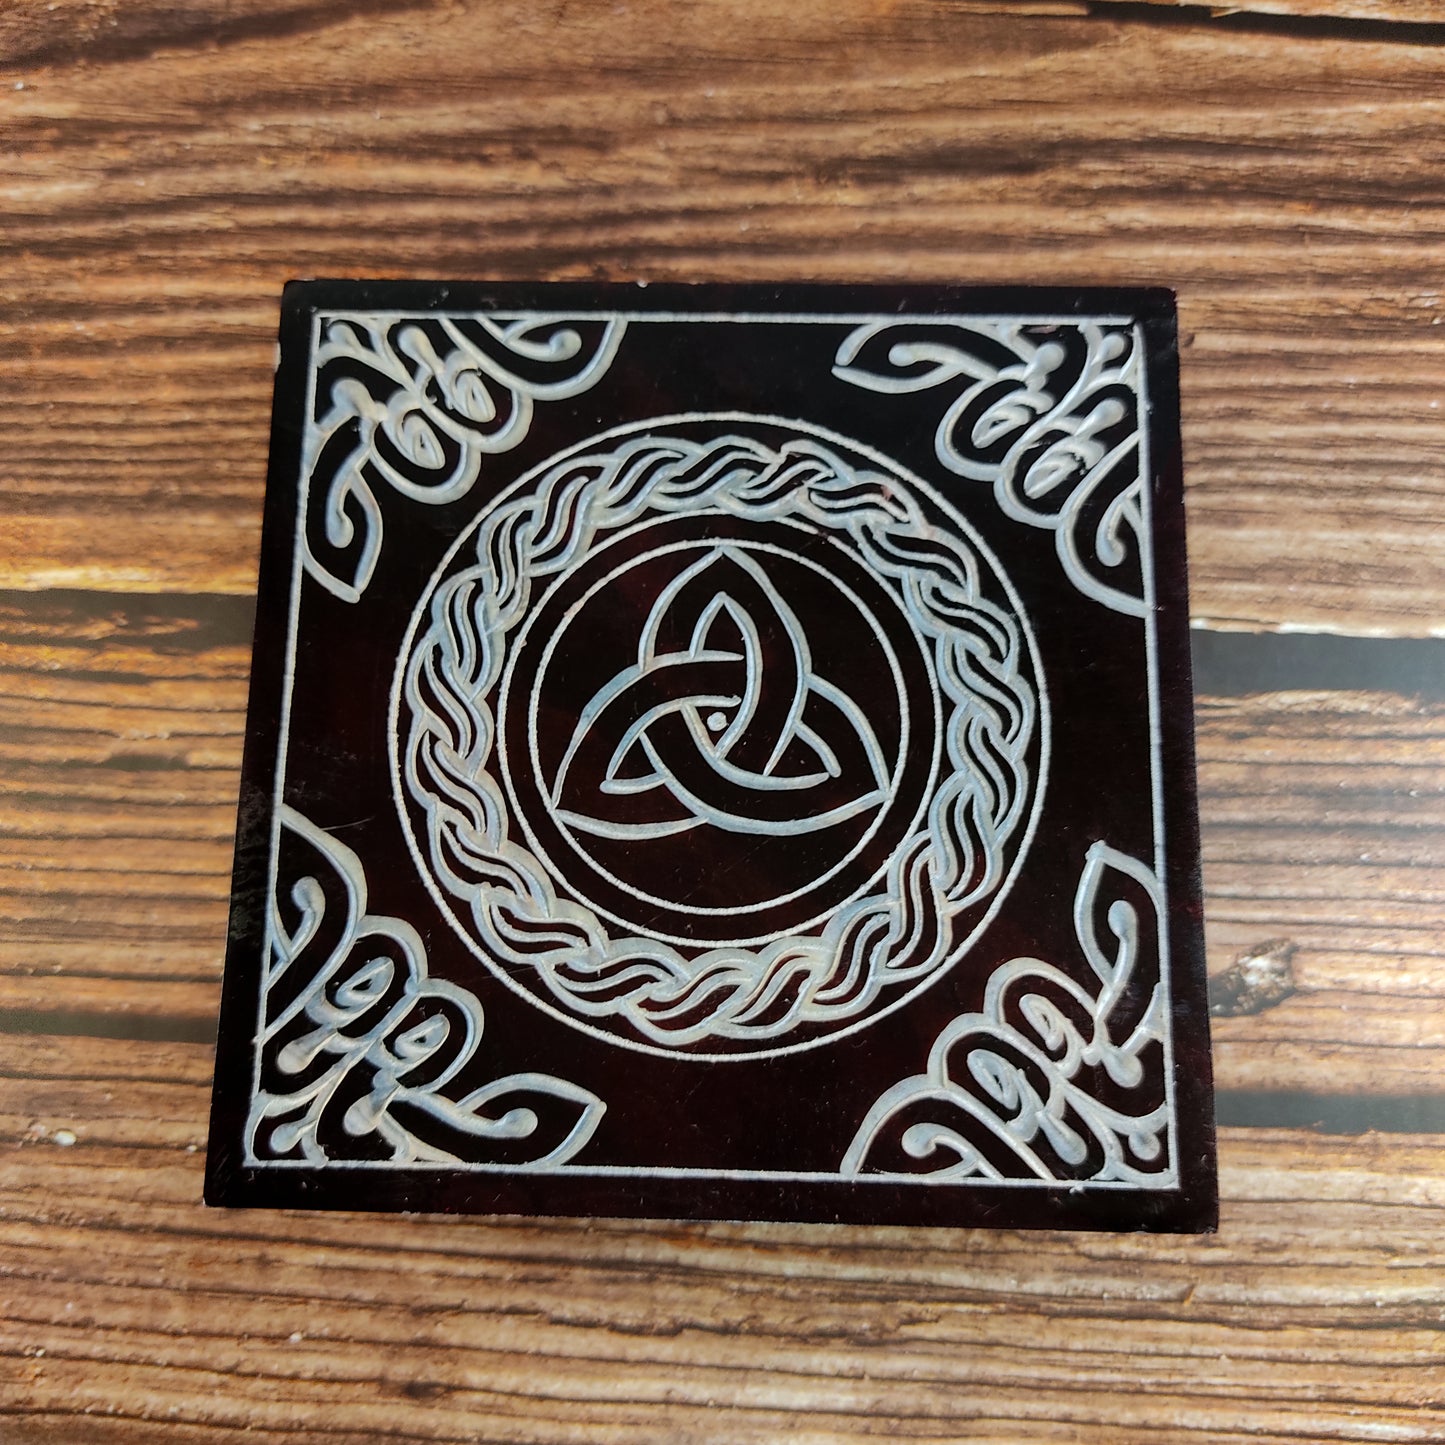 Triquetra Hand-carved Jewelry Box Soapstone Lovely Home Decoration Gift 5"x5"